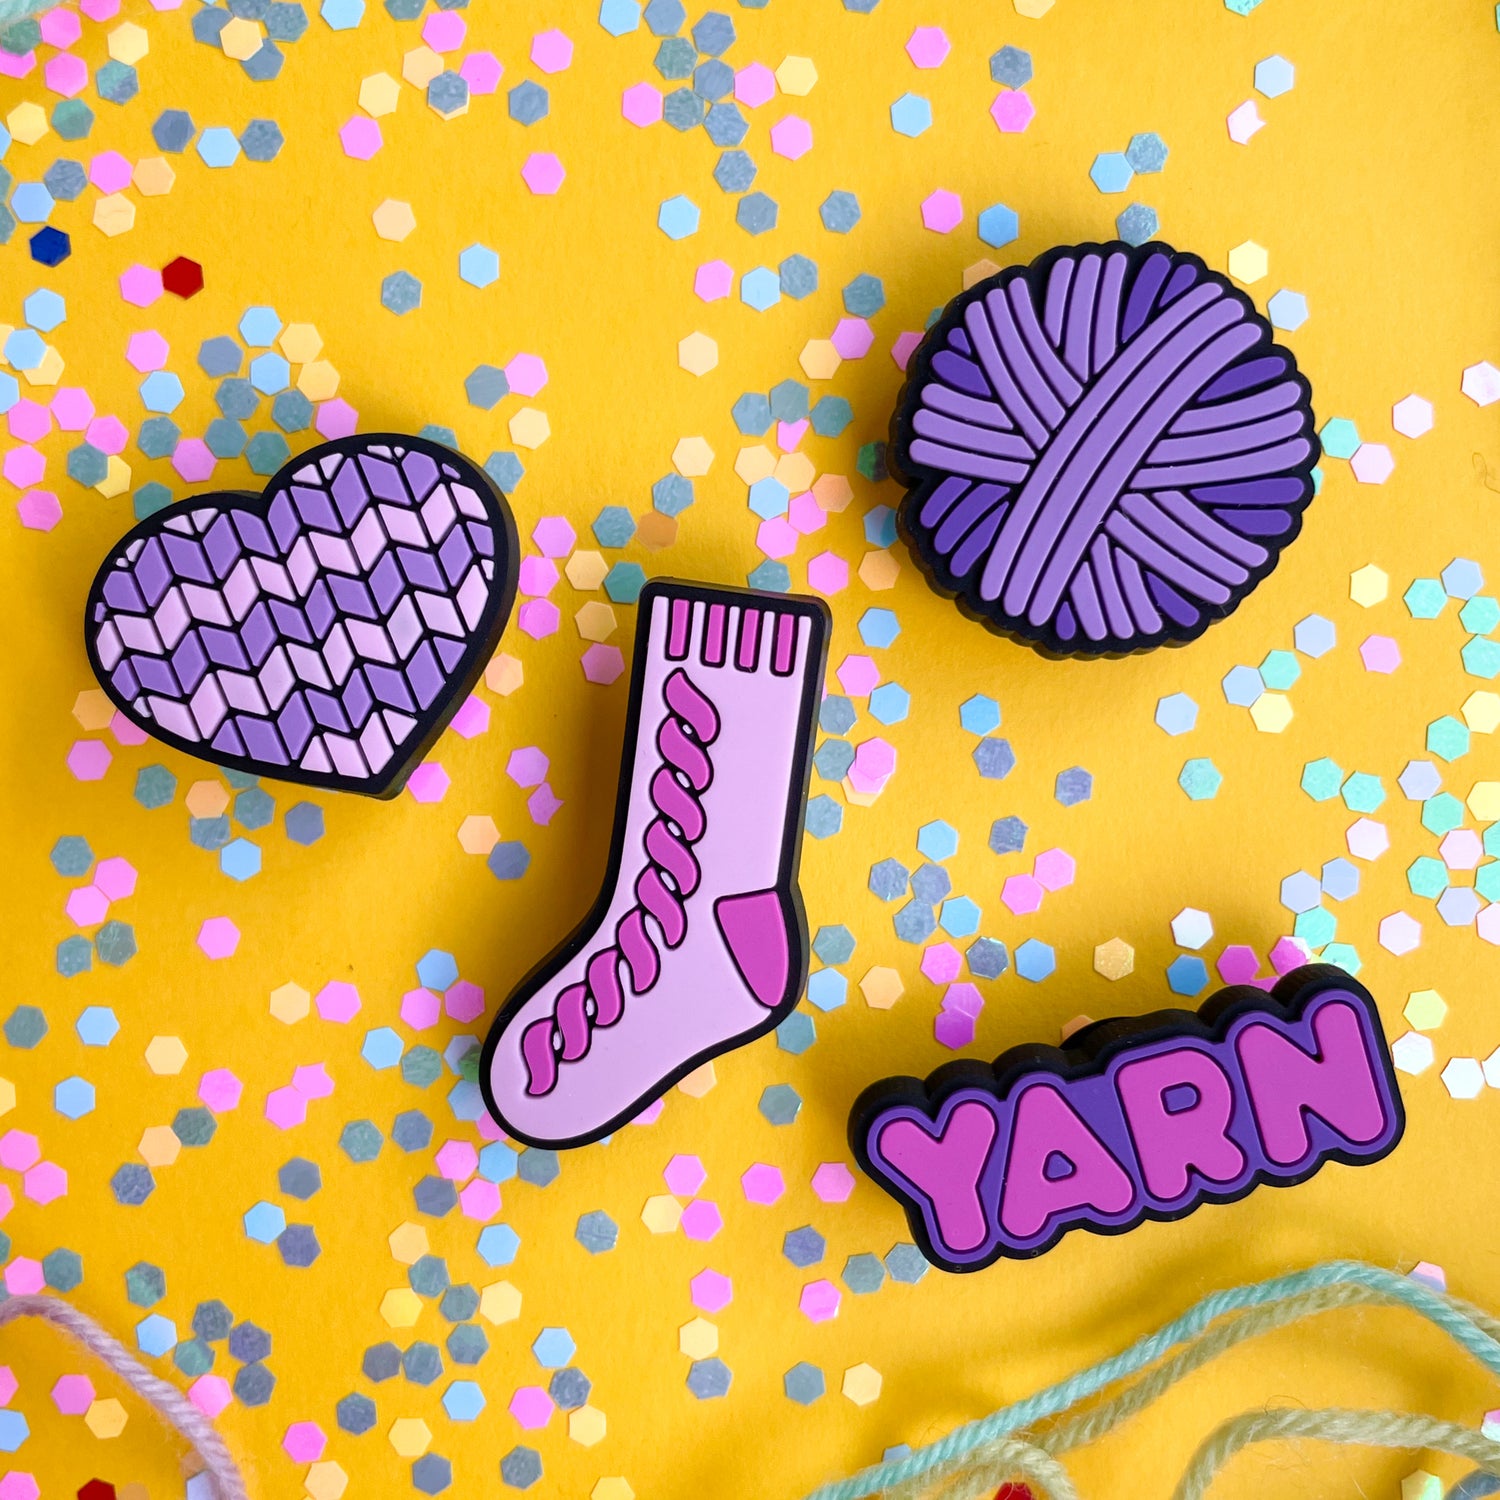 PVC charms shaped like a heart, yarn ball, sock, and the word yarn in shades of pink and purple.  The charms are on a yellow background covered in confetti. 